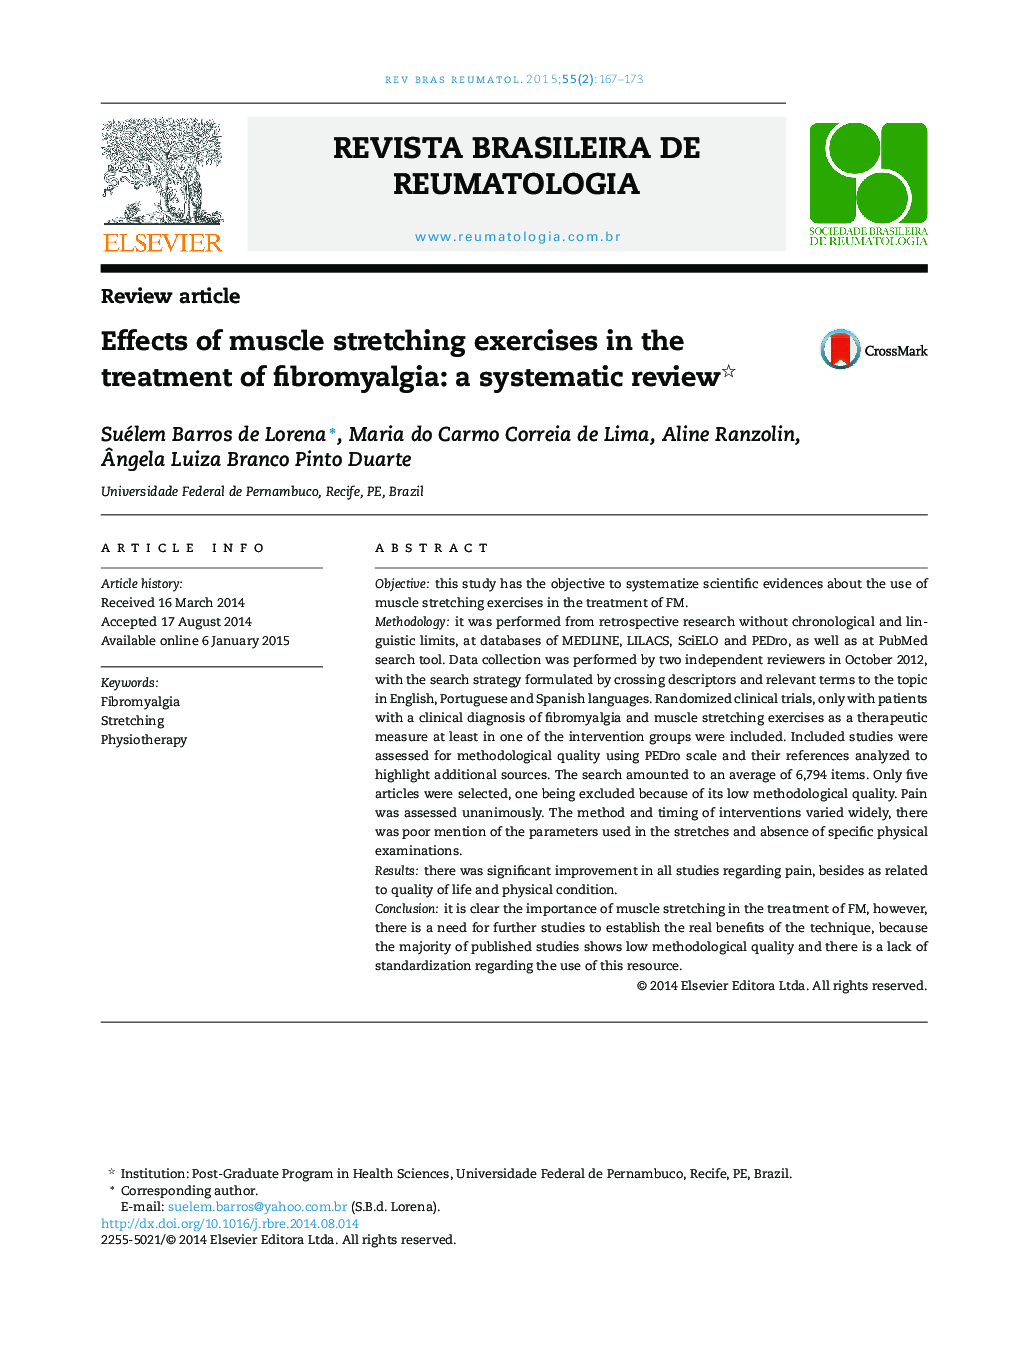 Effects of muscle stretching exercises in the treatment of fibromyalgia: a systematic review 